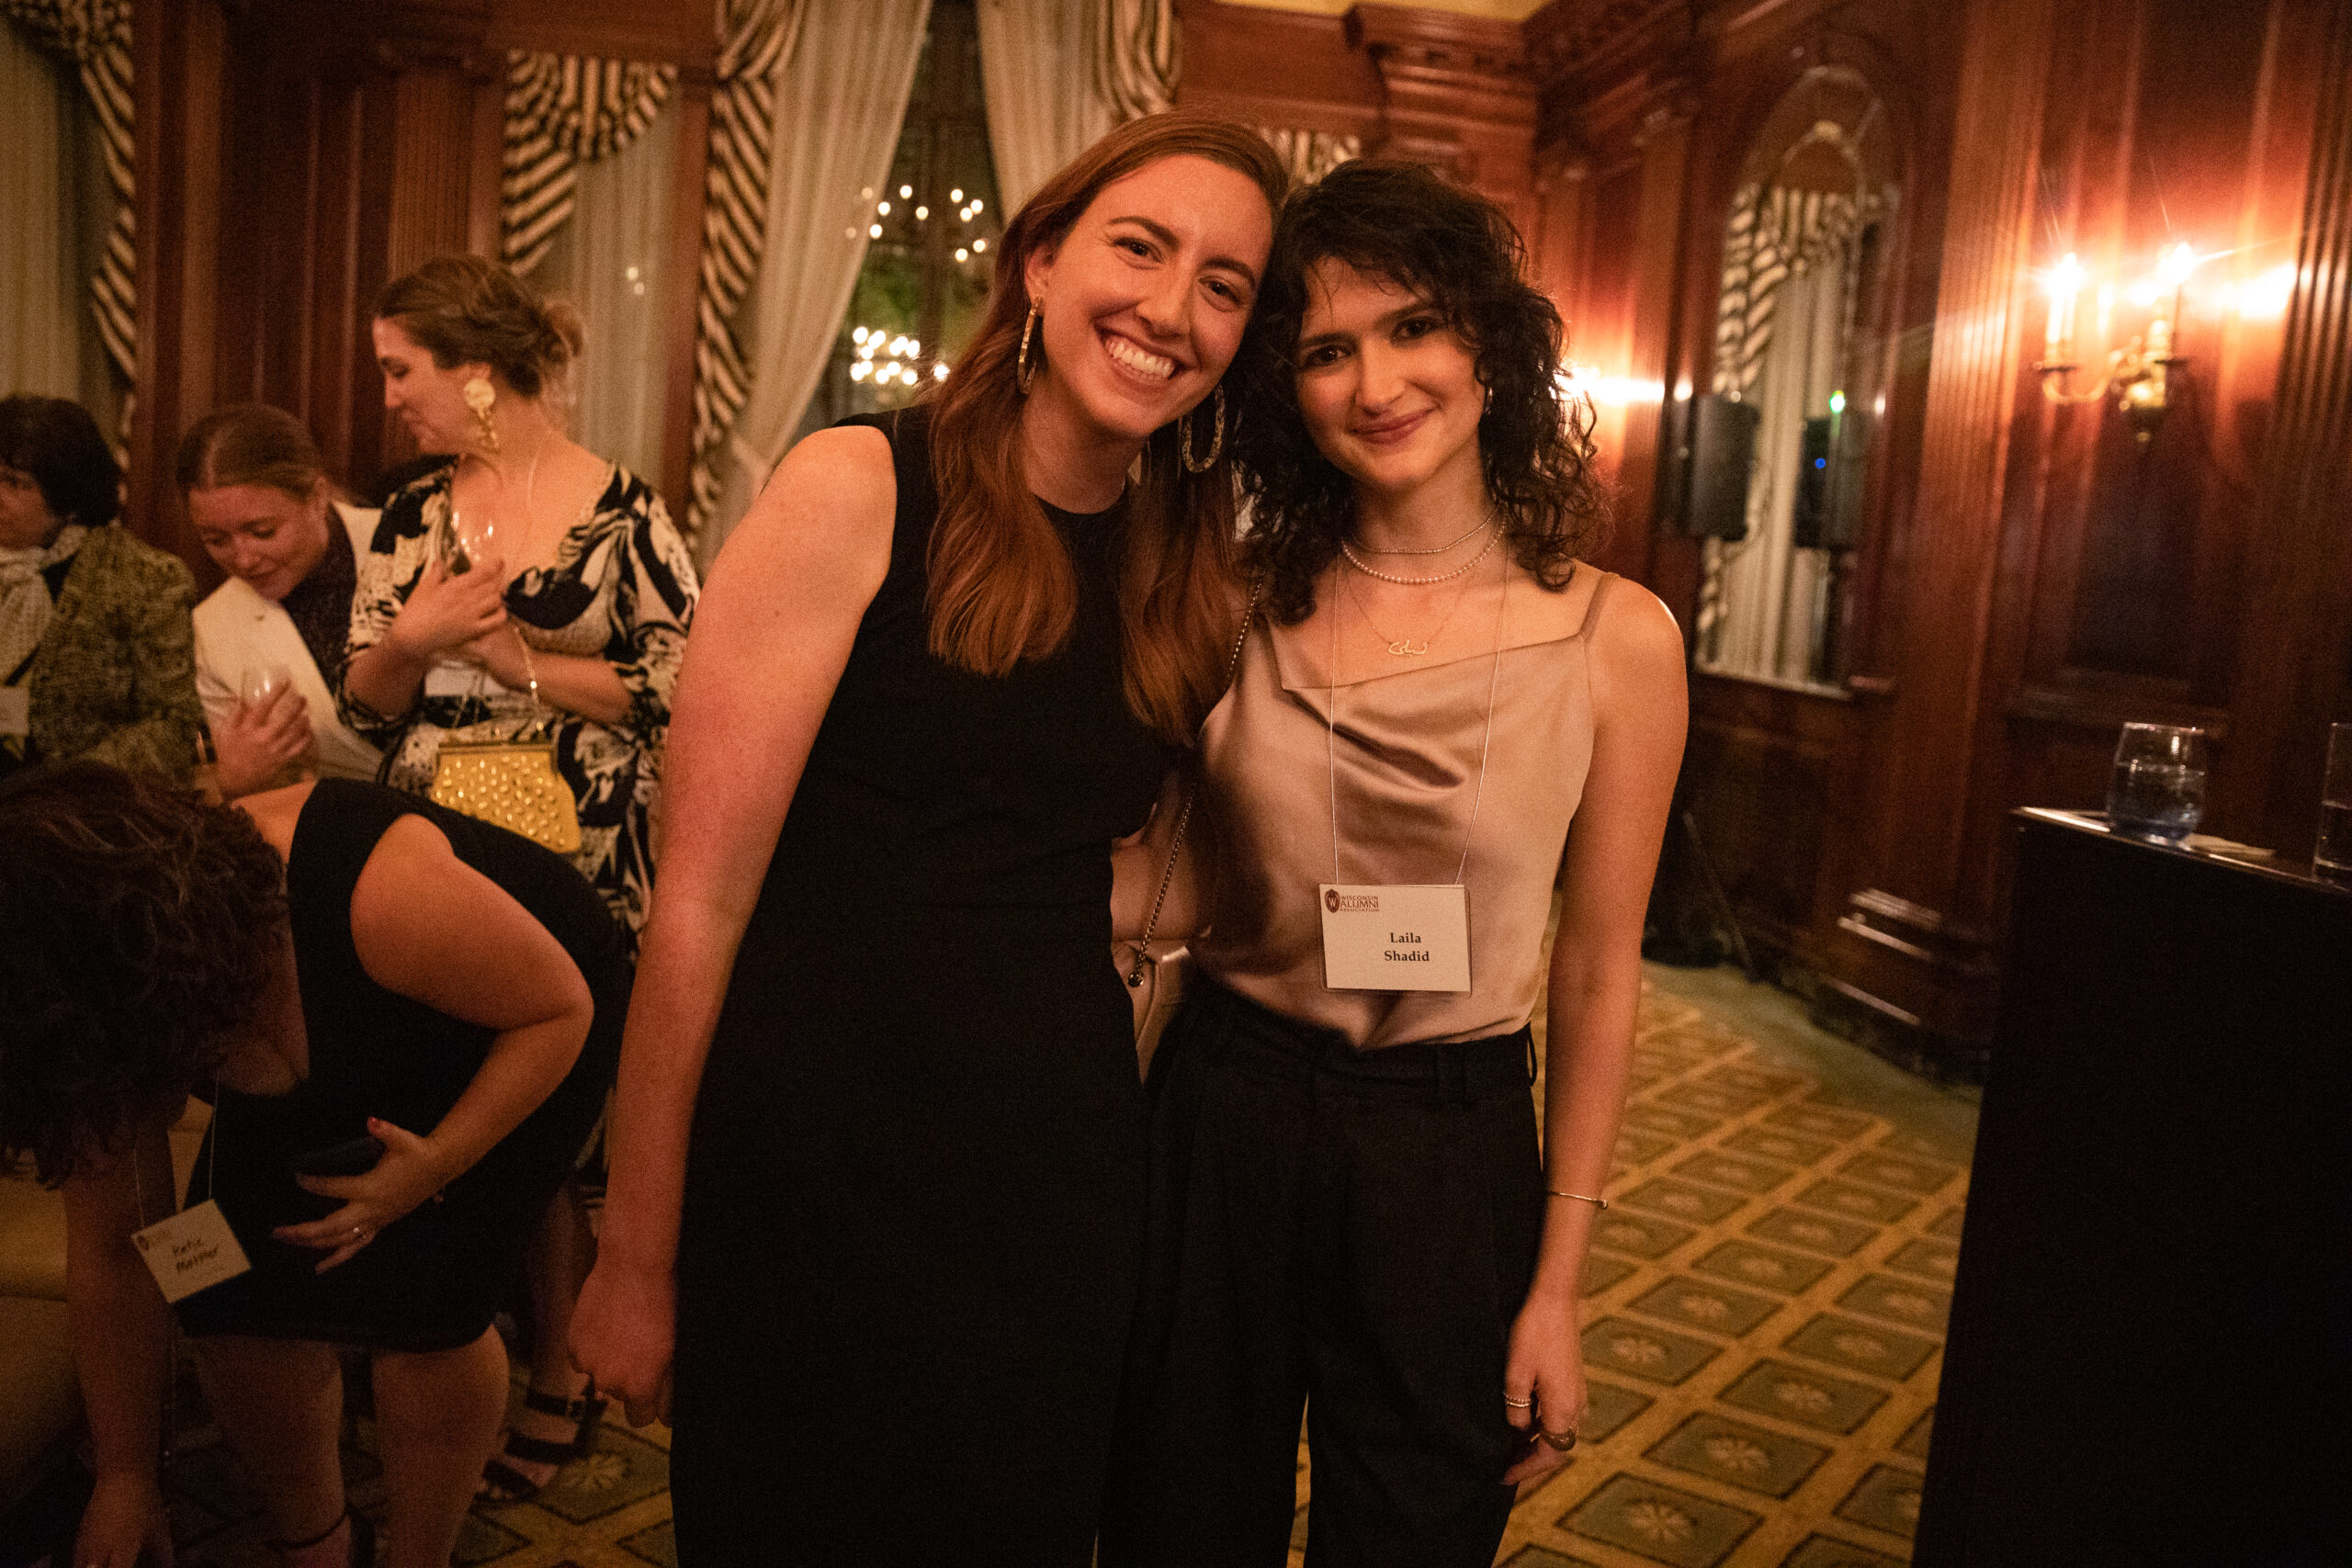 2022 Shadid Award winner Jessica Contrera stands with Anthony Shadid's daughter Laila Shadid at an award ceremony held in New York City on May 17, 2022.